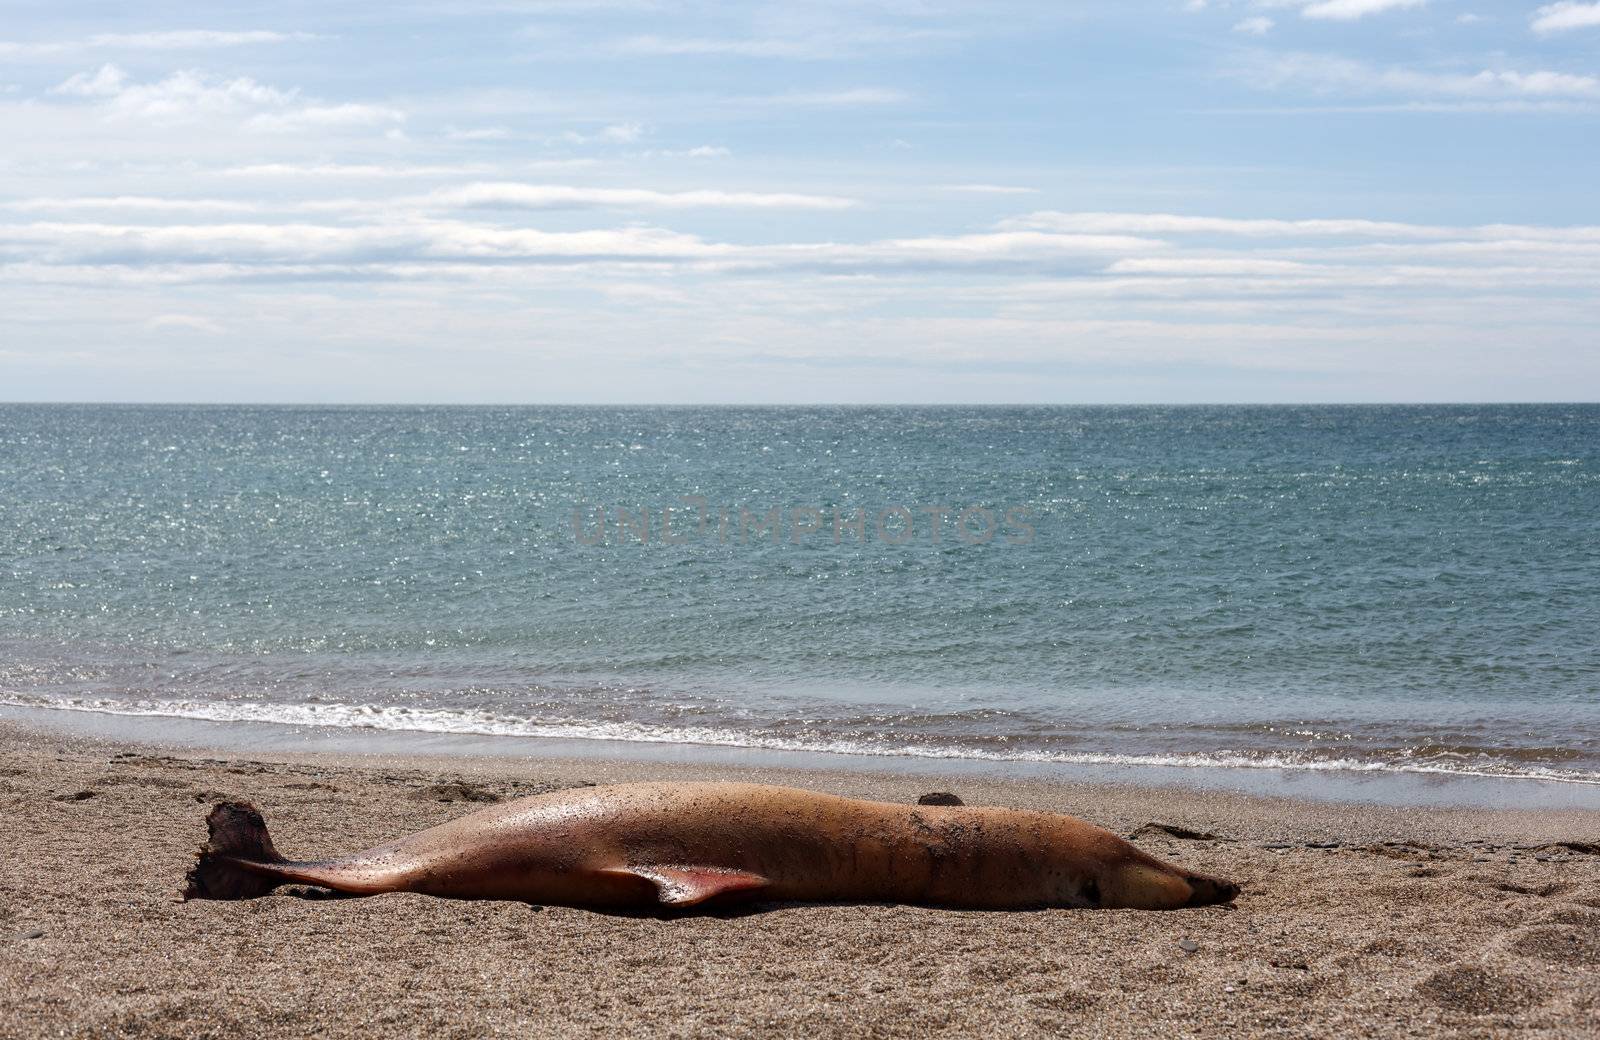 The victim Bottlenose dolphin lies on the coast